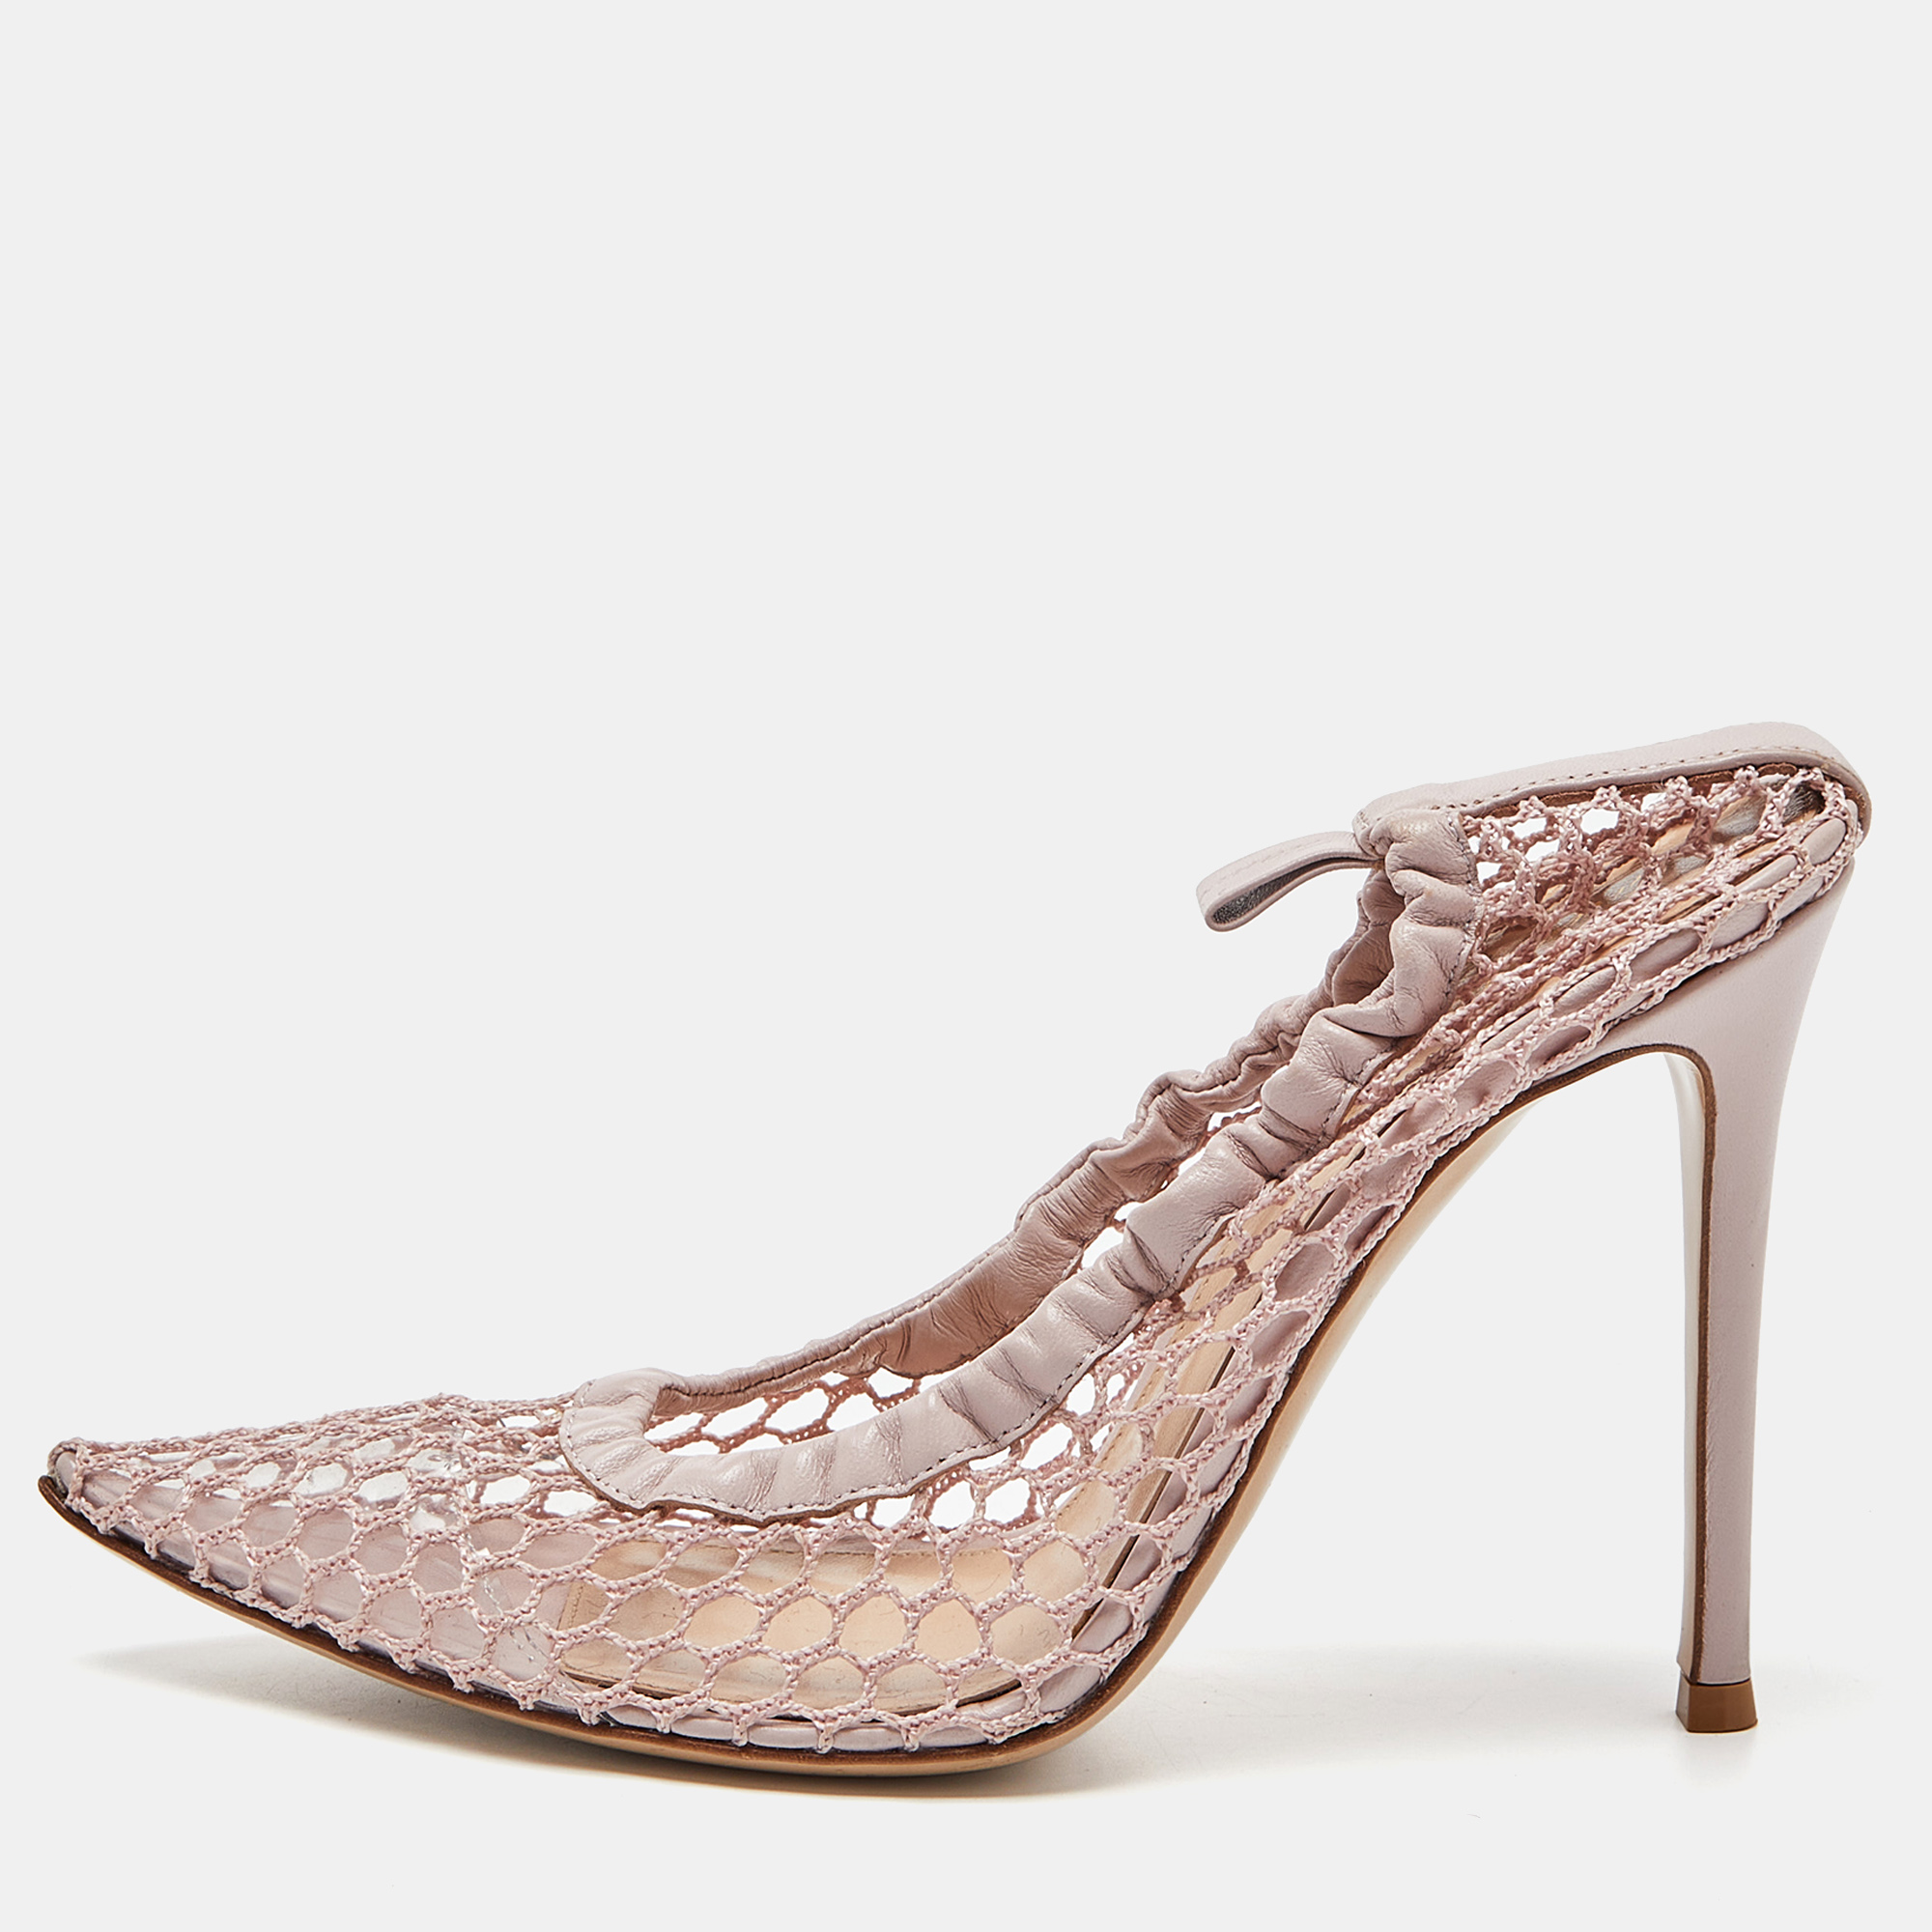 Gianvito Rossi Pink Net And Leather Pumps Size 39